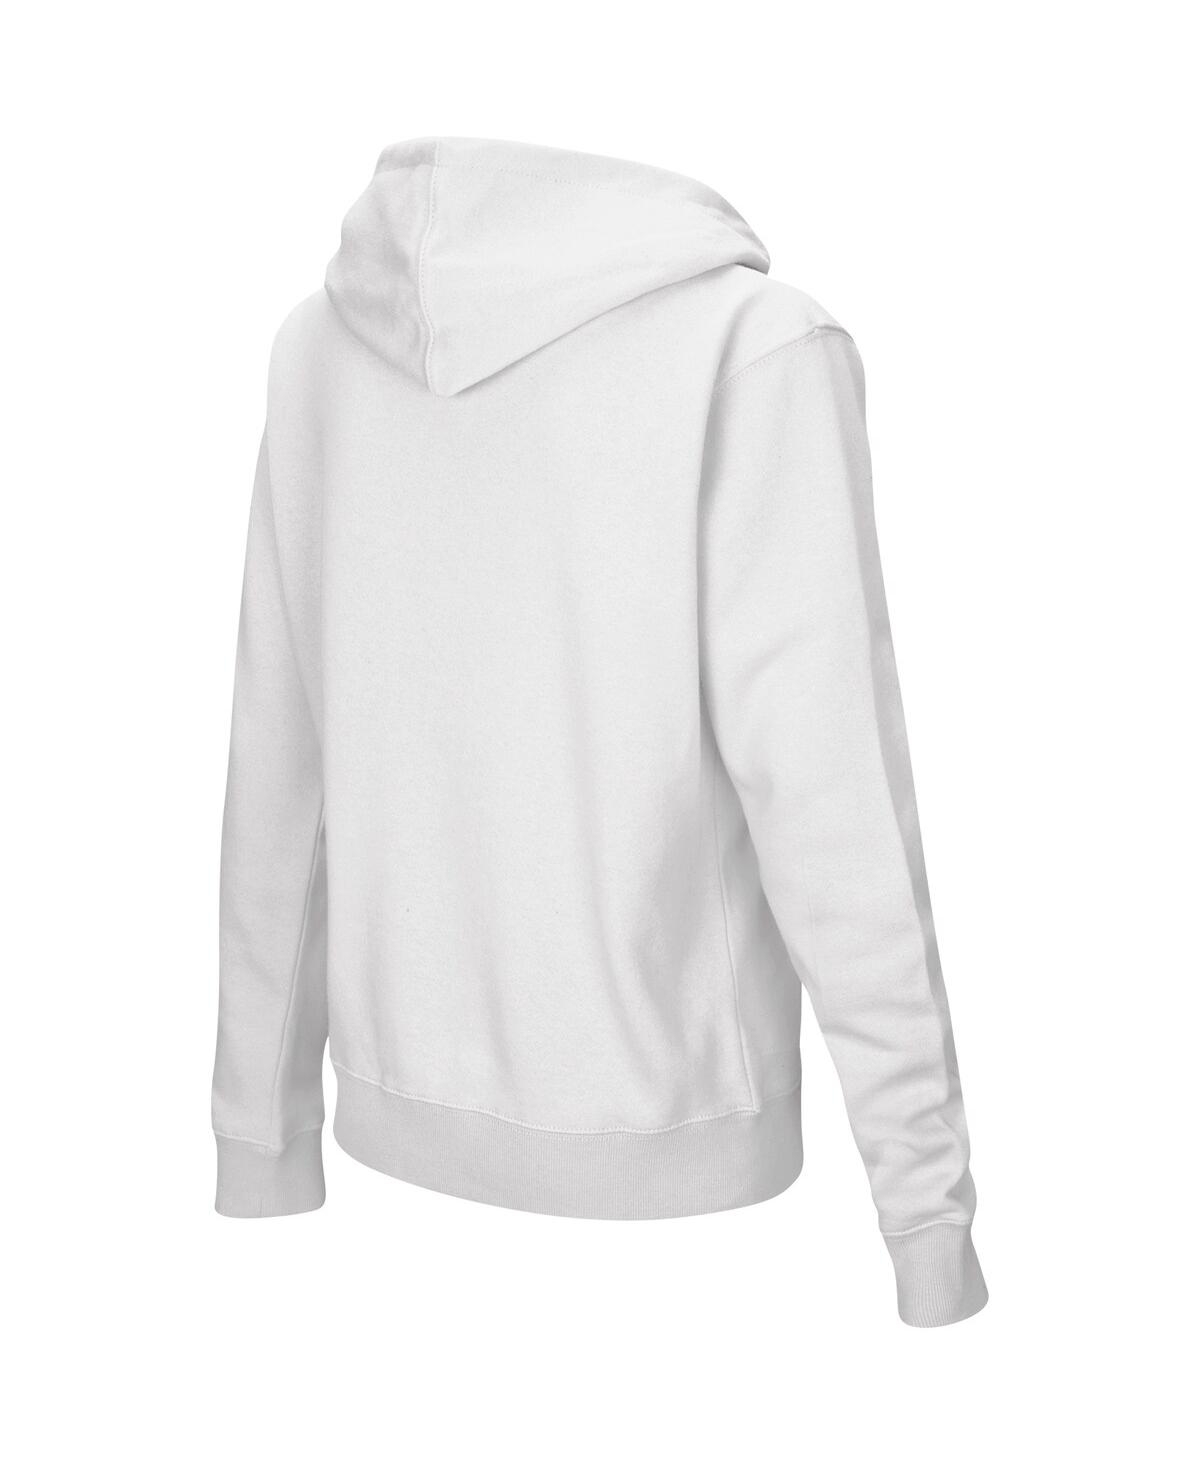 Shop Colosseum Women's  White Indiana Hoosiers Arched Name Full-zip Hoodie